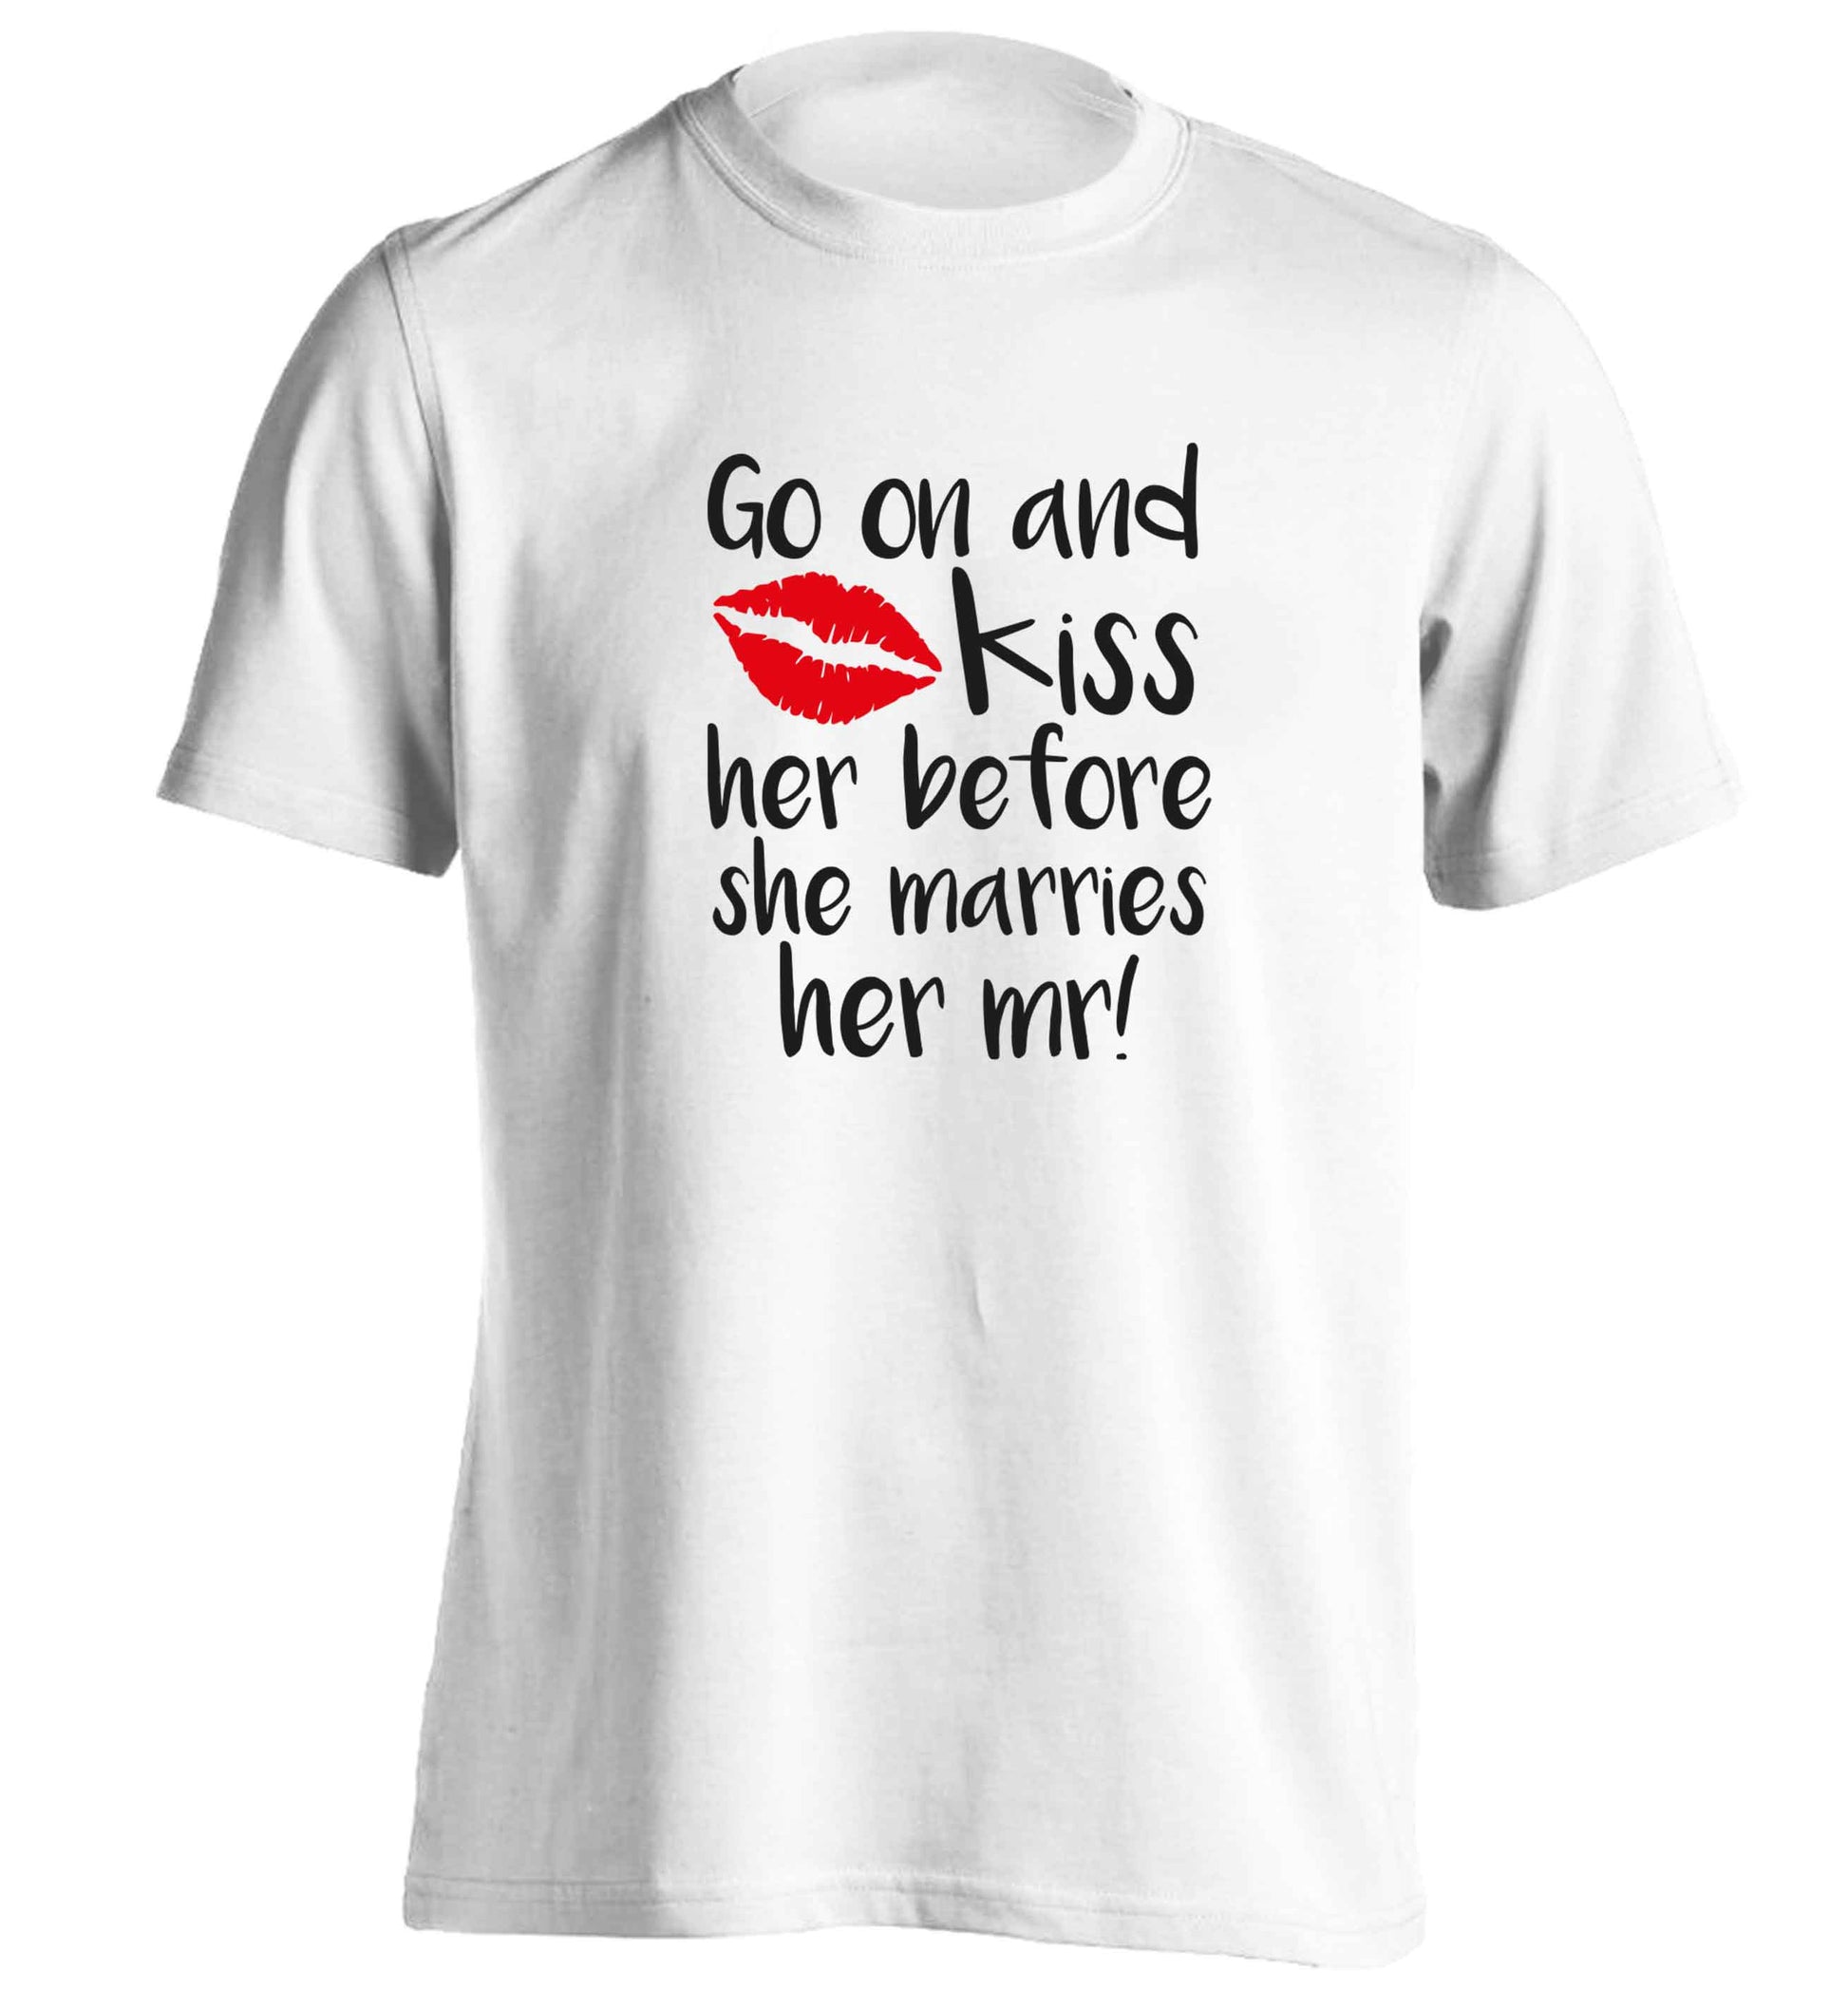 Kiss her before she marries her mr! adults unisex white Tshirt 2XL